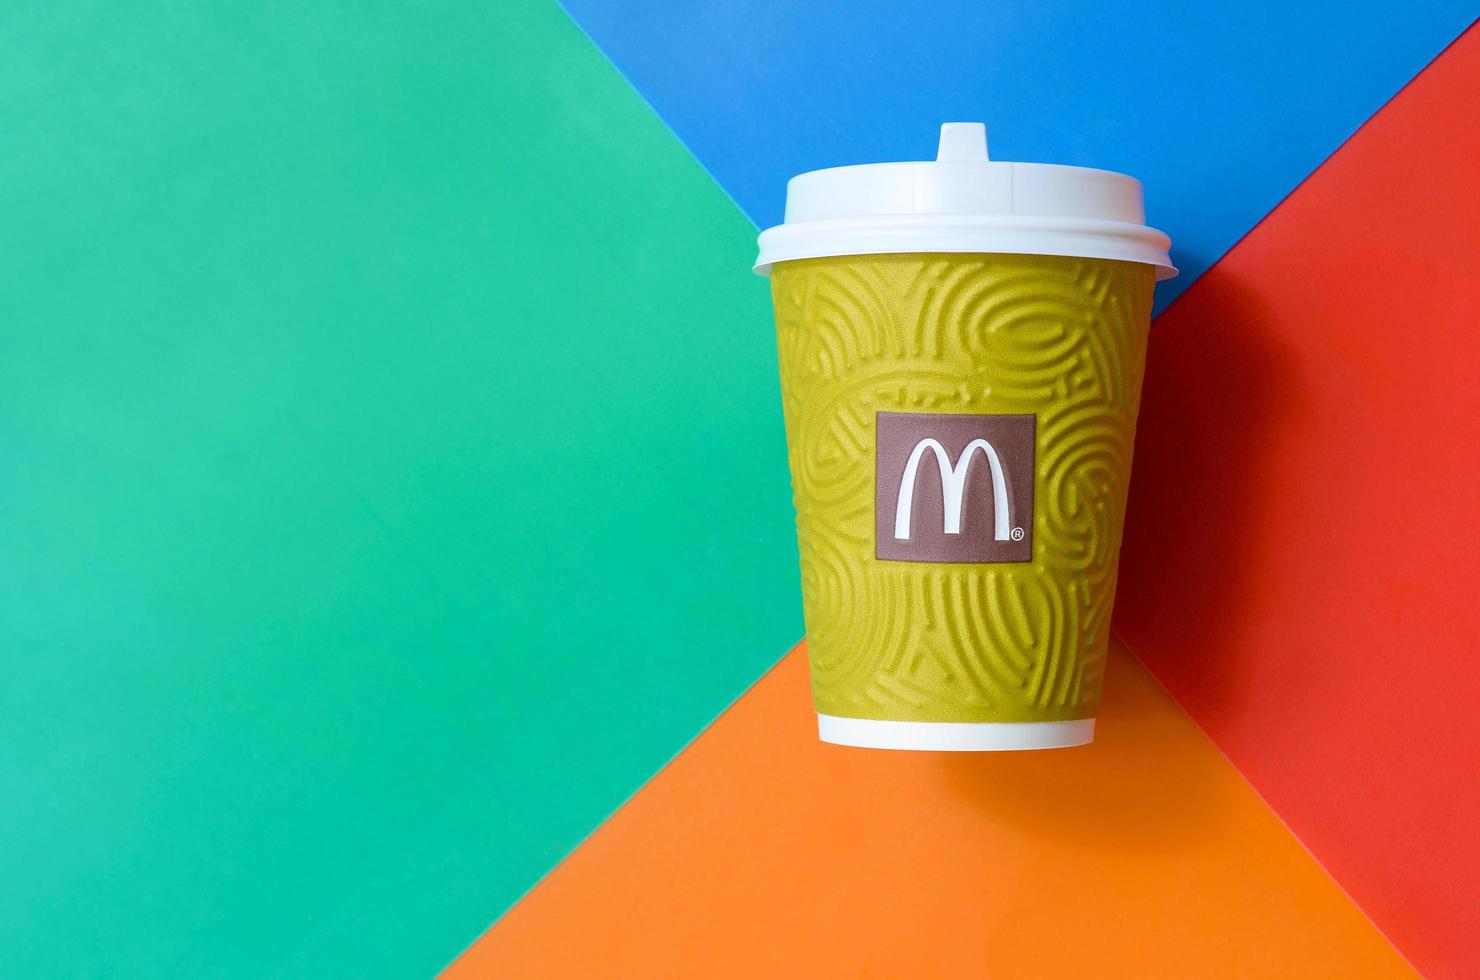 KHARKOV, UKRAINE - MAY 12, 2022 McDonald's paper disposable coffee cup on bright colors mix background photo